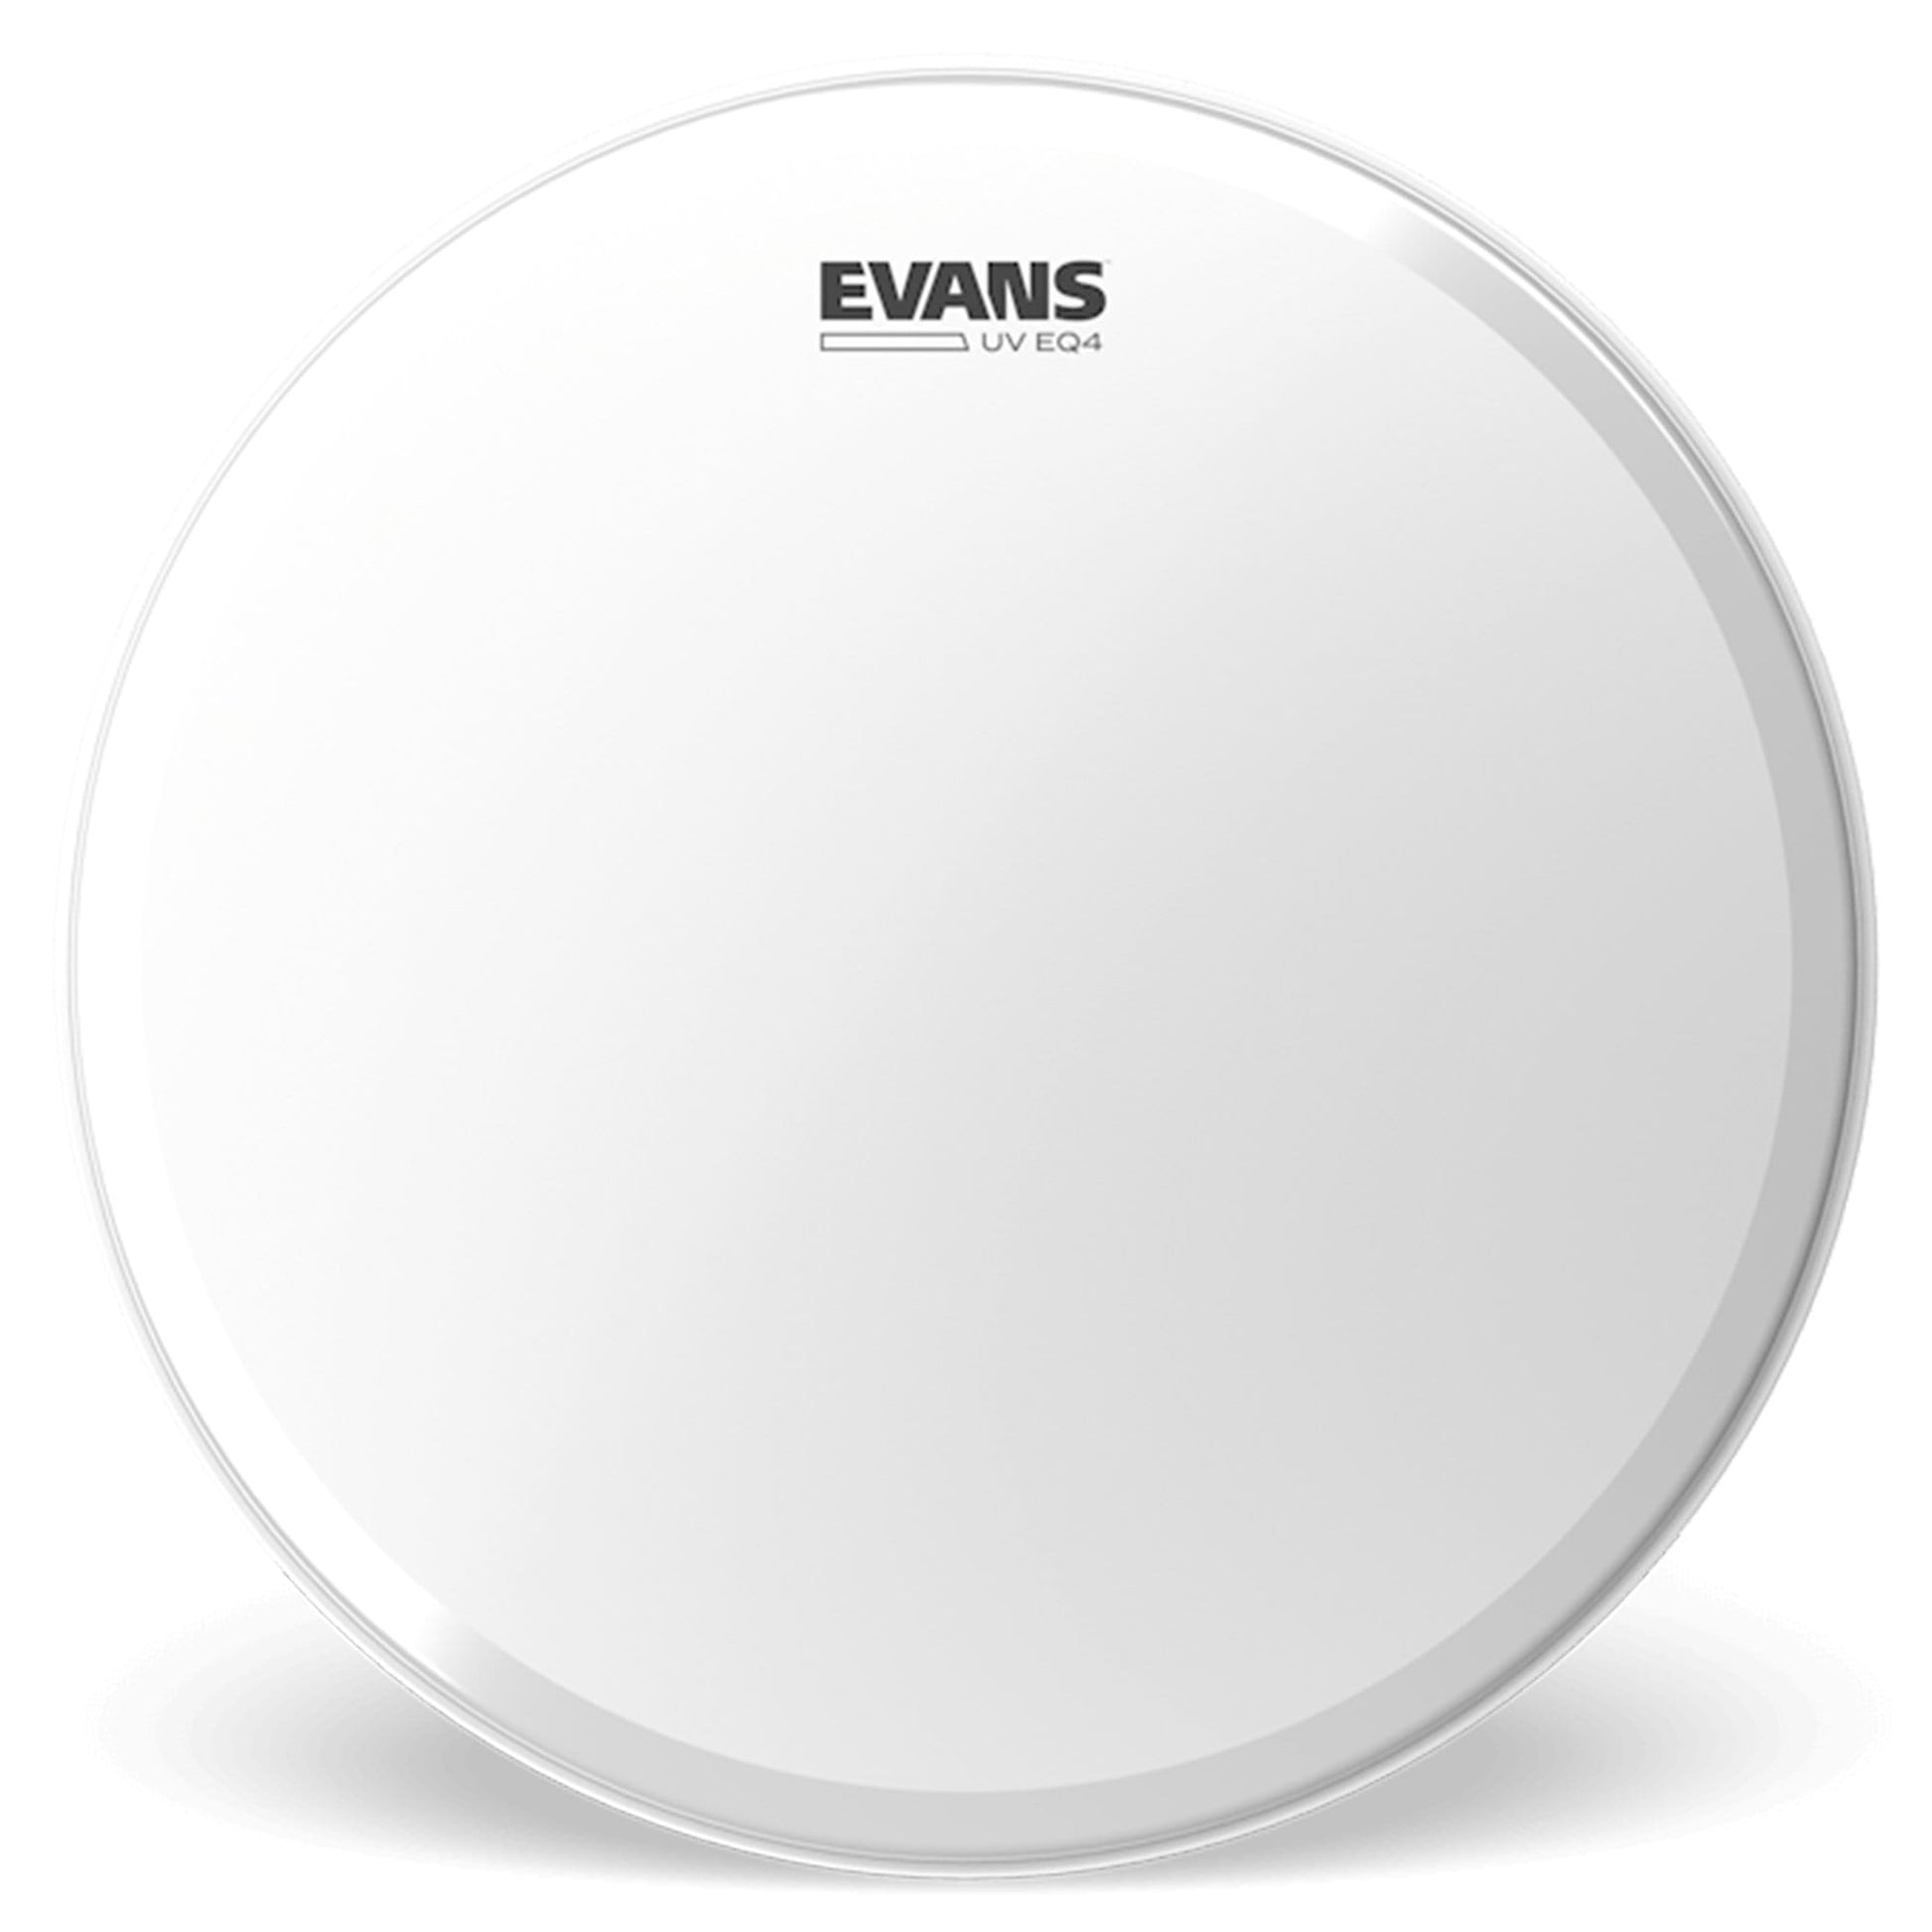 Evans 24" UV EQ4 Bass Drumhead Drums and Percussion / Parts and Accessories / Heads